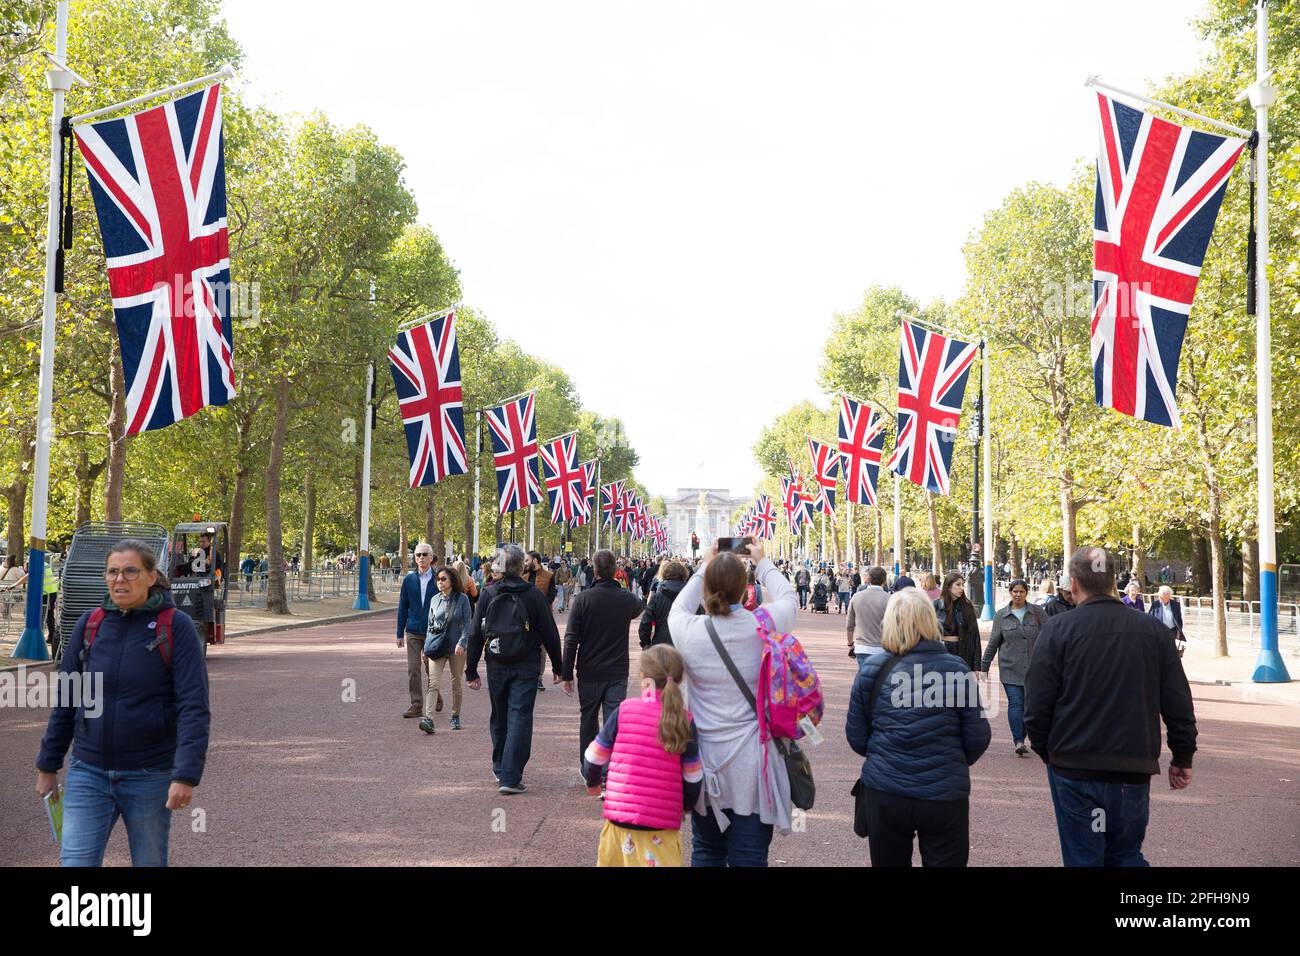 People walk on The Mall in London as many people gather around Buckingham Palace on the first Saturday since the state funeral of Queen Elizabeth II. Stock Photo